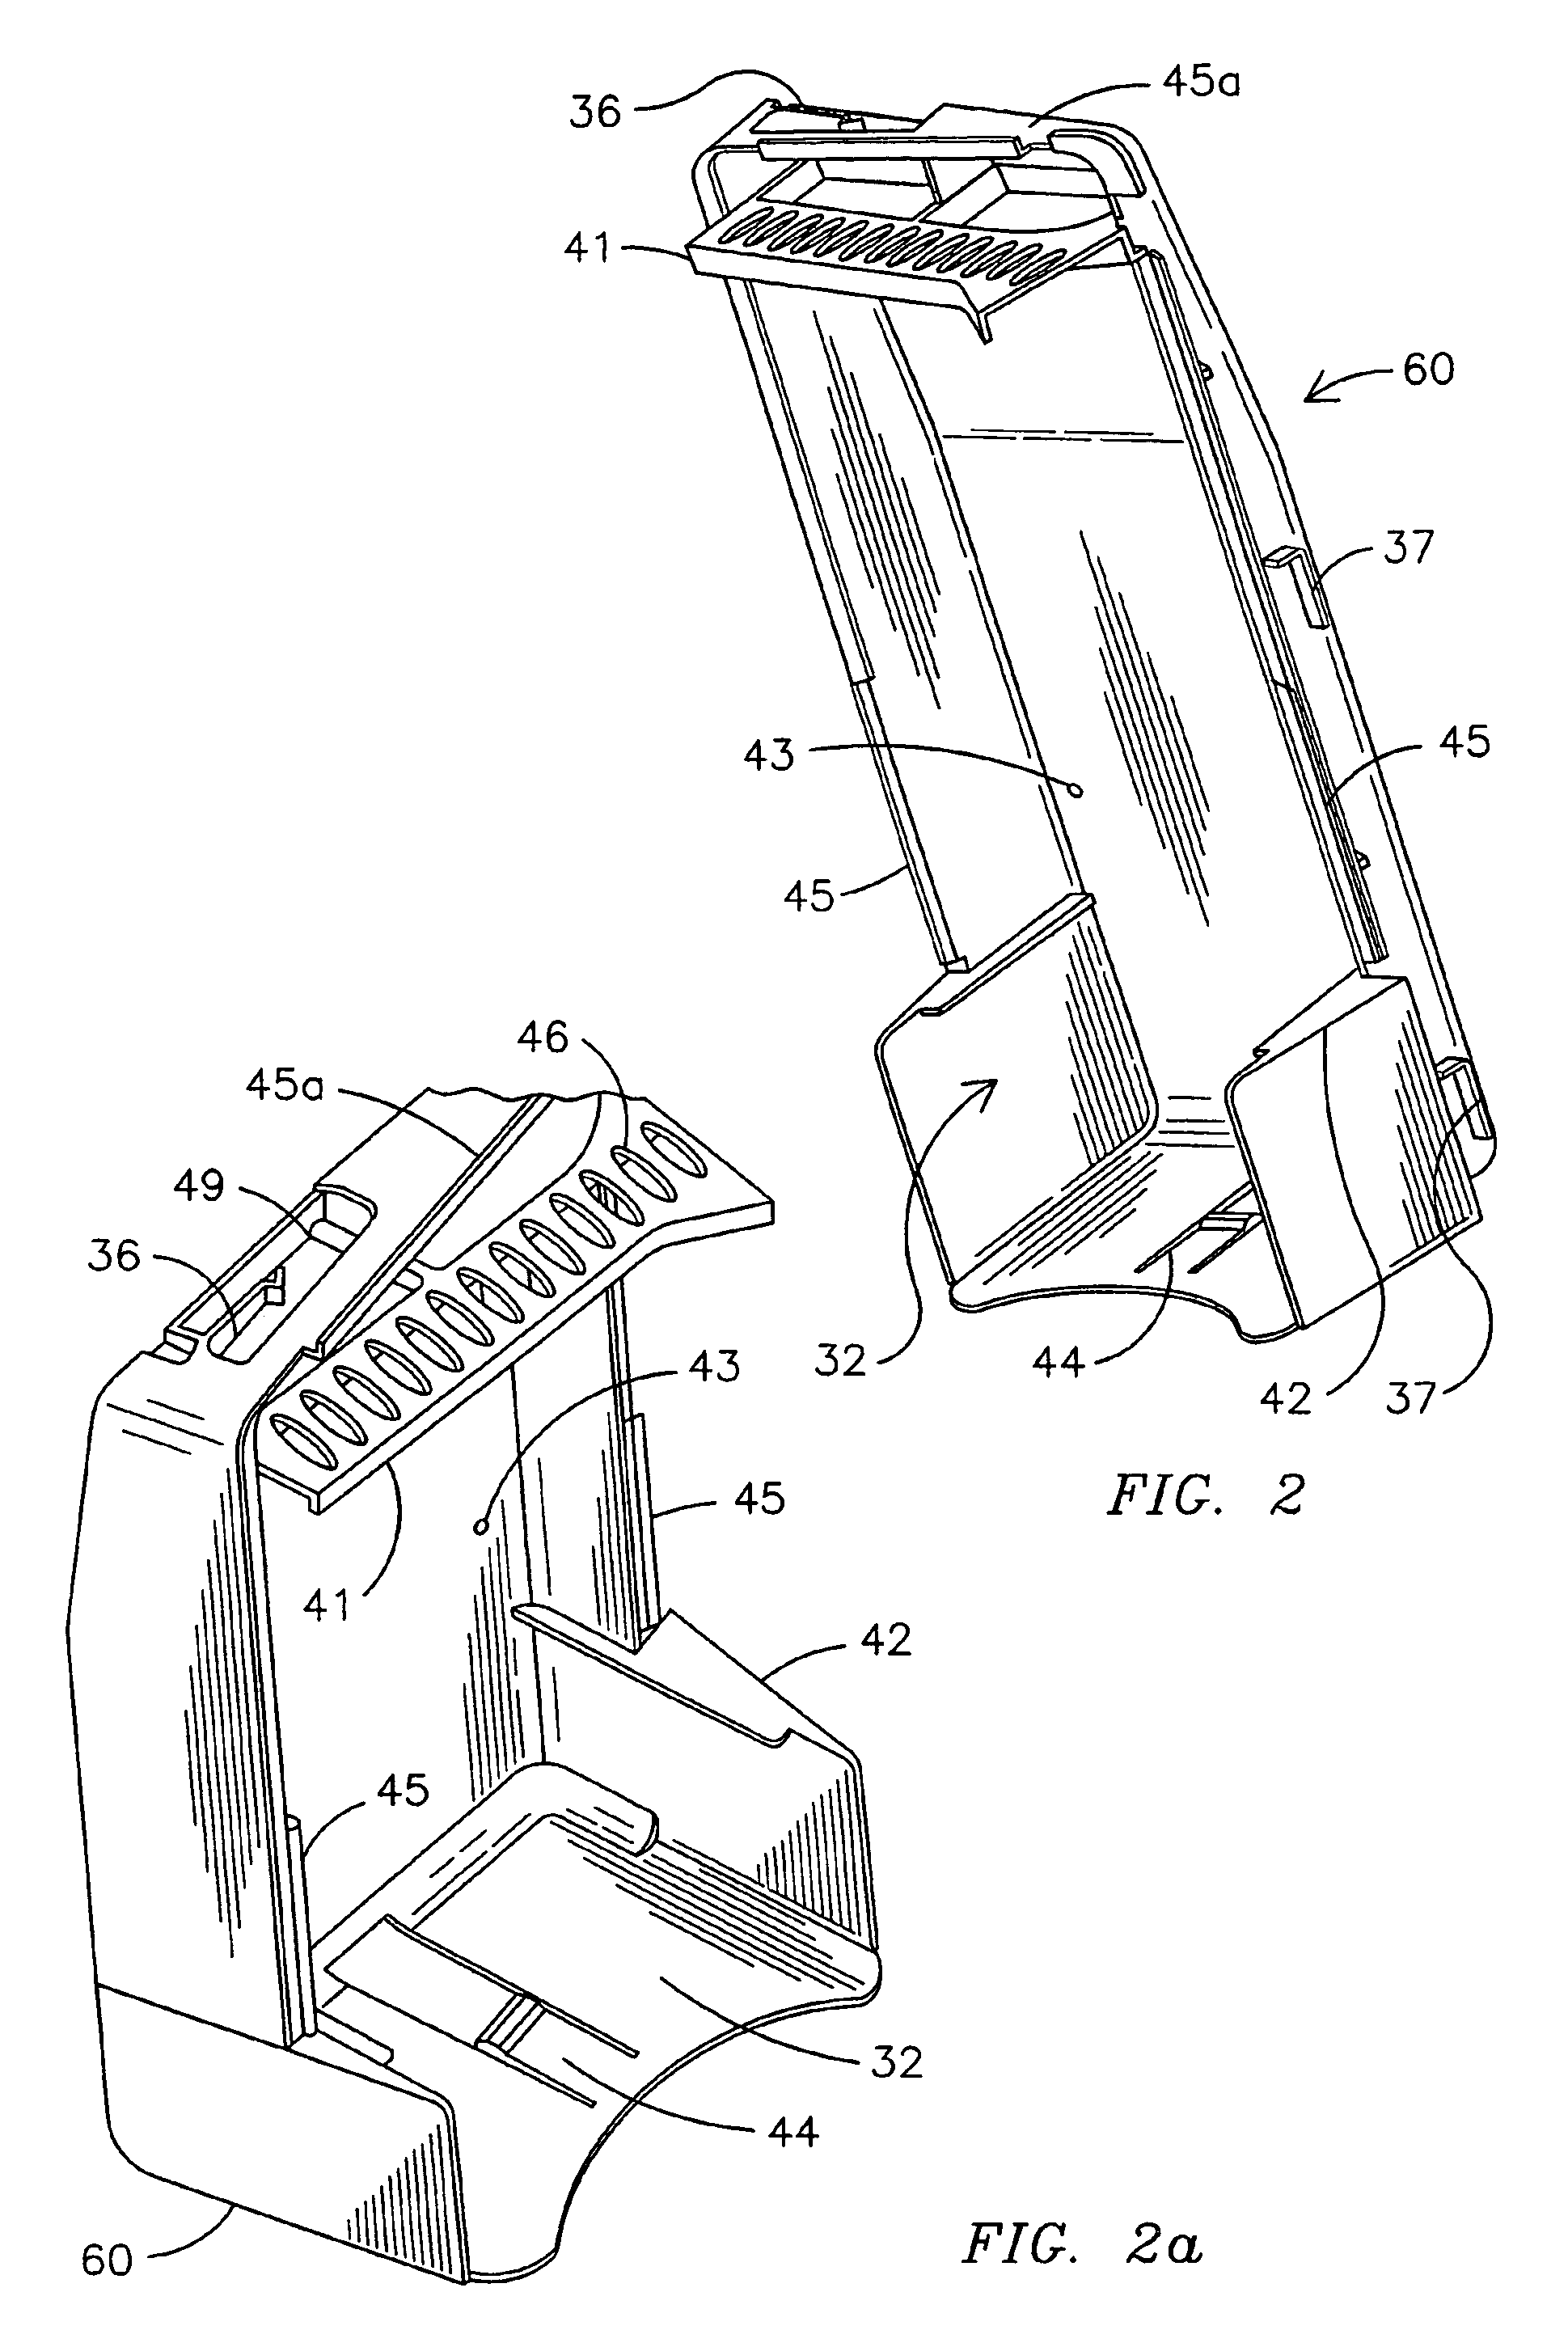 Ice cube making device for refrigerators